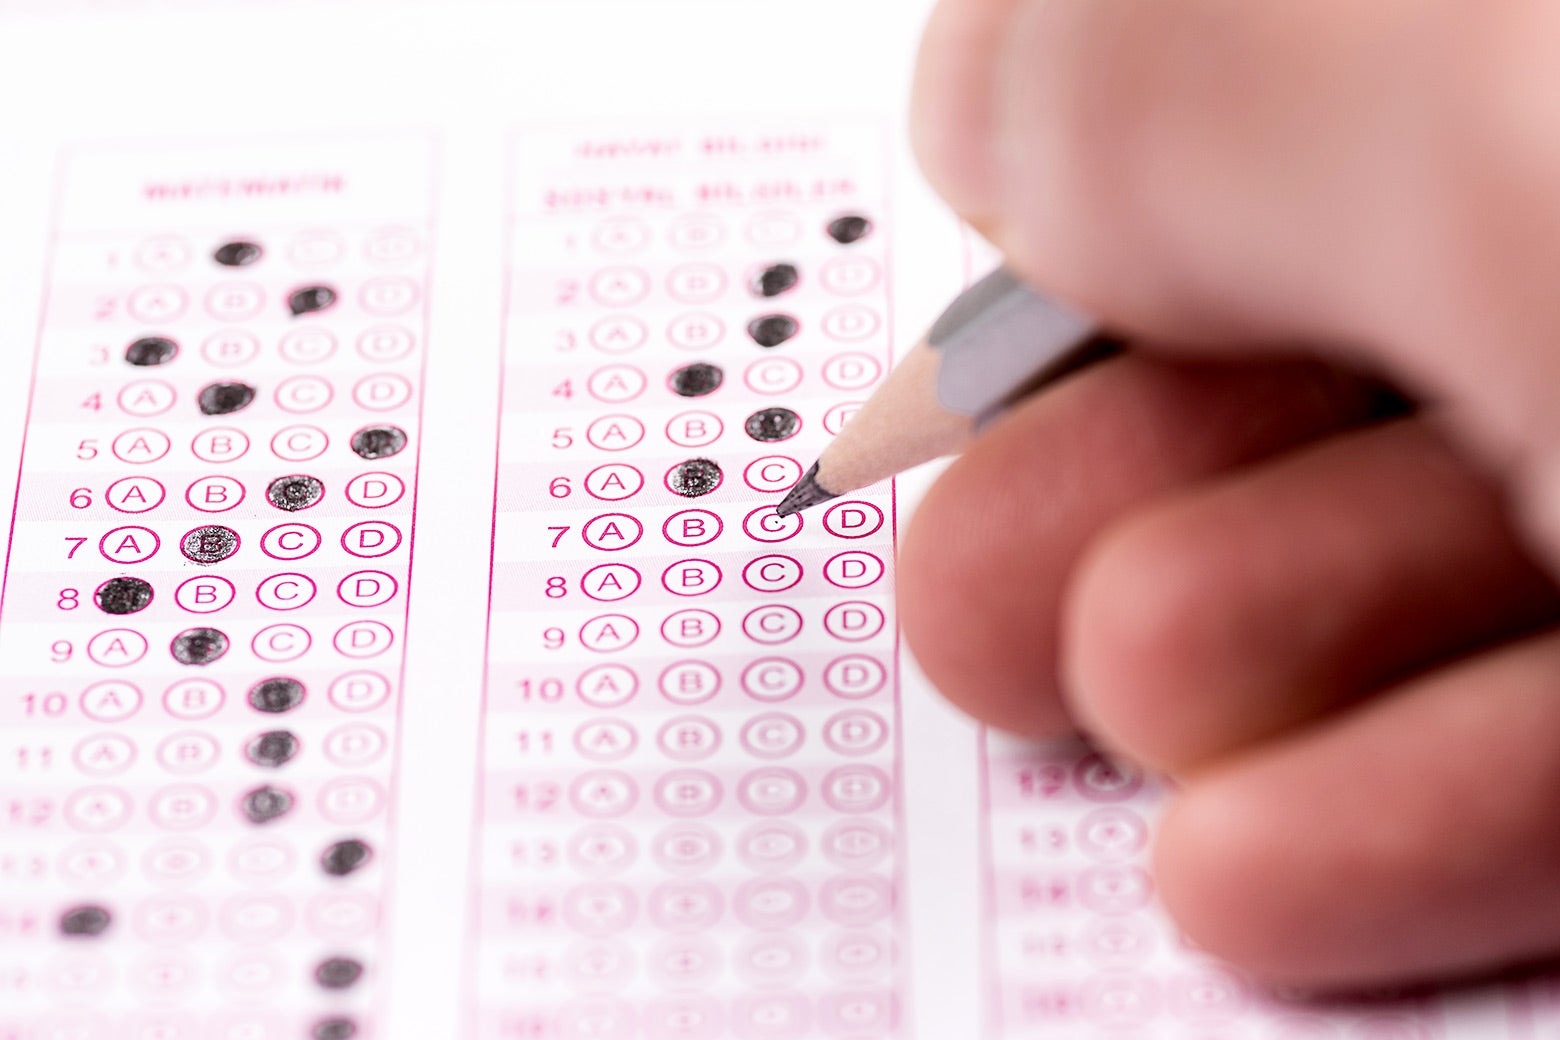 A hand holding a pencil over a multiple choice test form on which some bubbles have already been filled in.